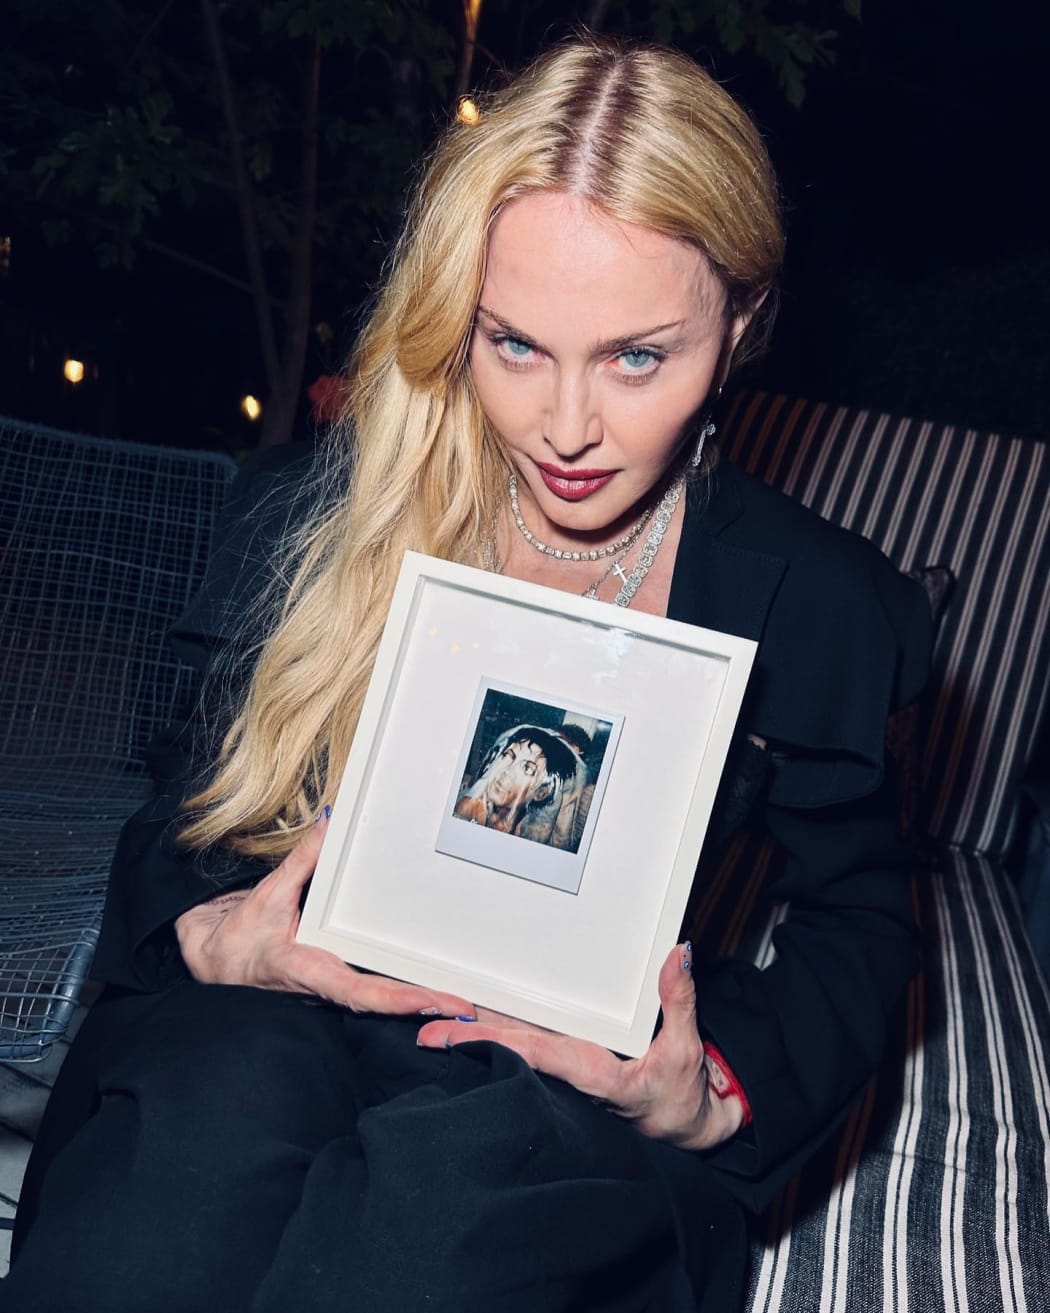 Madonna Finds Comfort in Warhol's Polaroid Featuring Keith Haring in Michael Jackson Jacket